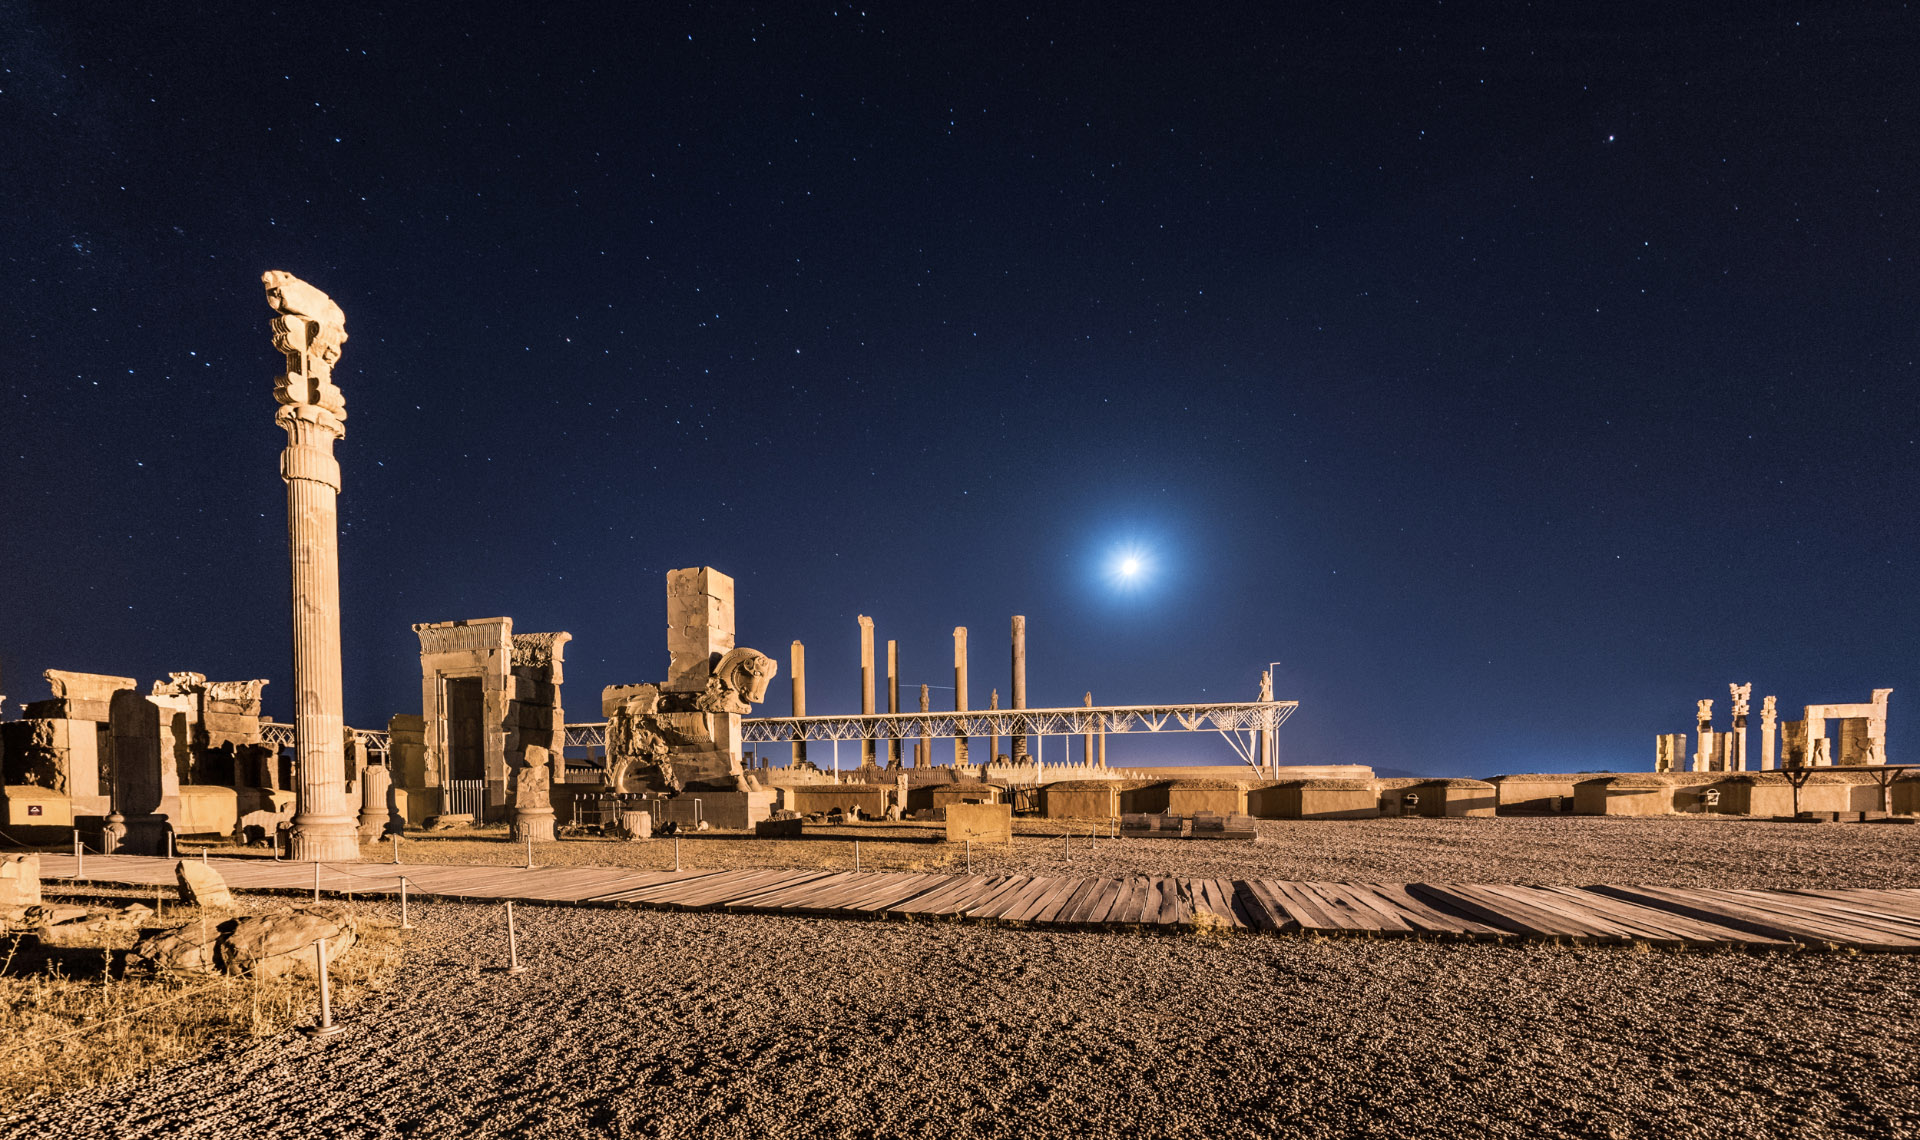 Images of Persepolis | 1920x1140